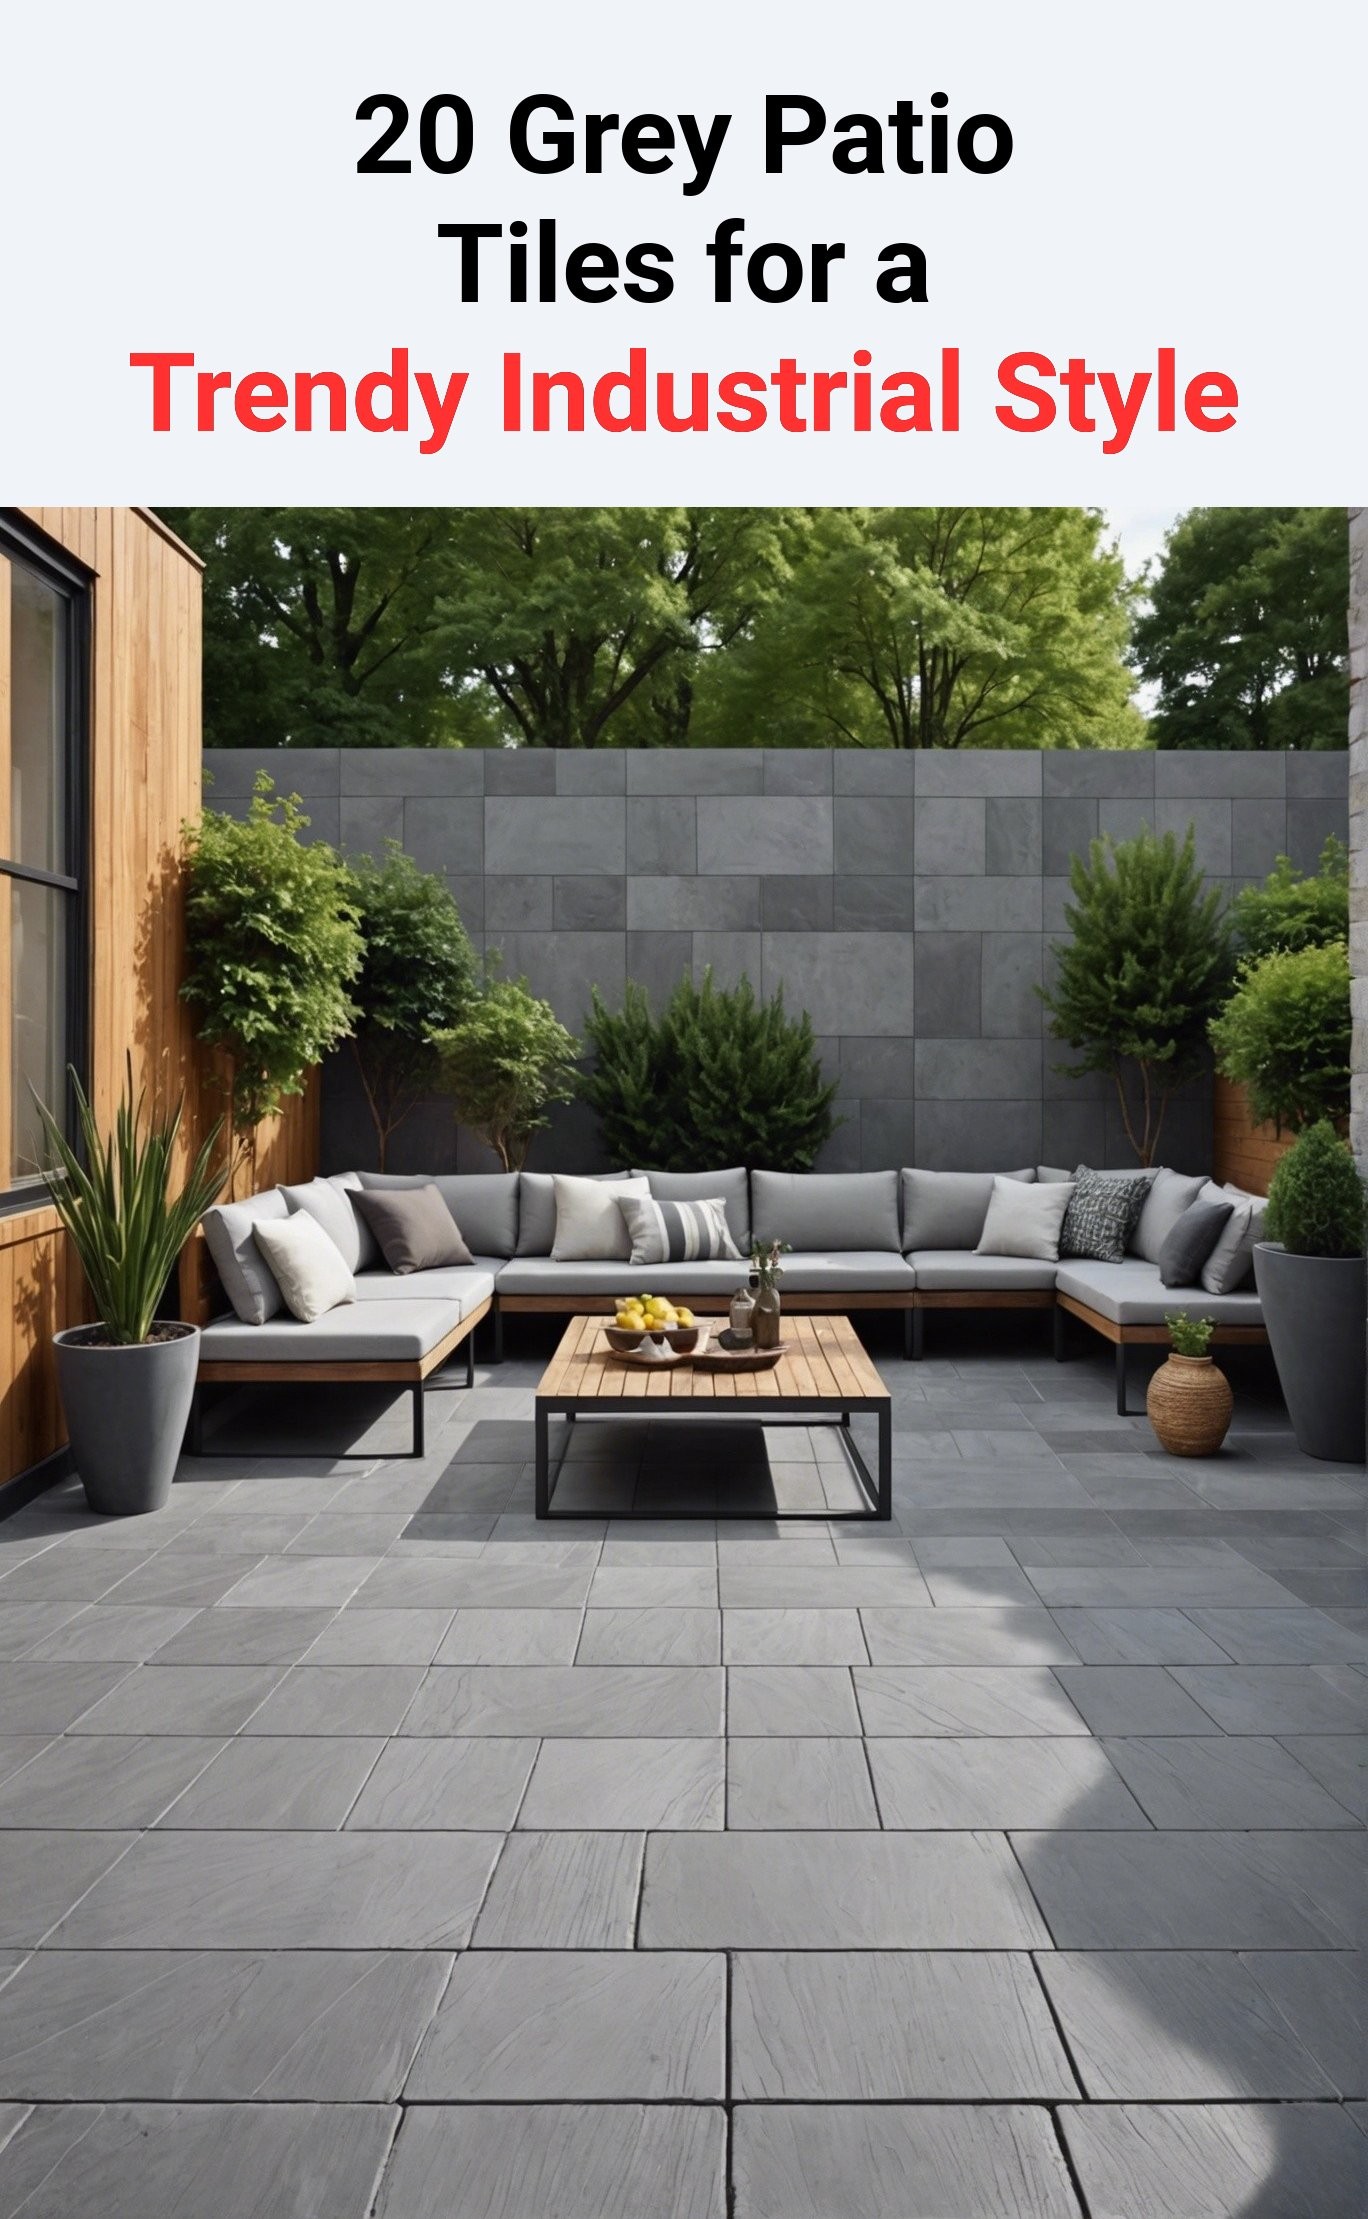 20 Grey Patio Tiles for a Trendy Industrial Style